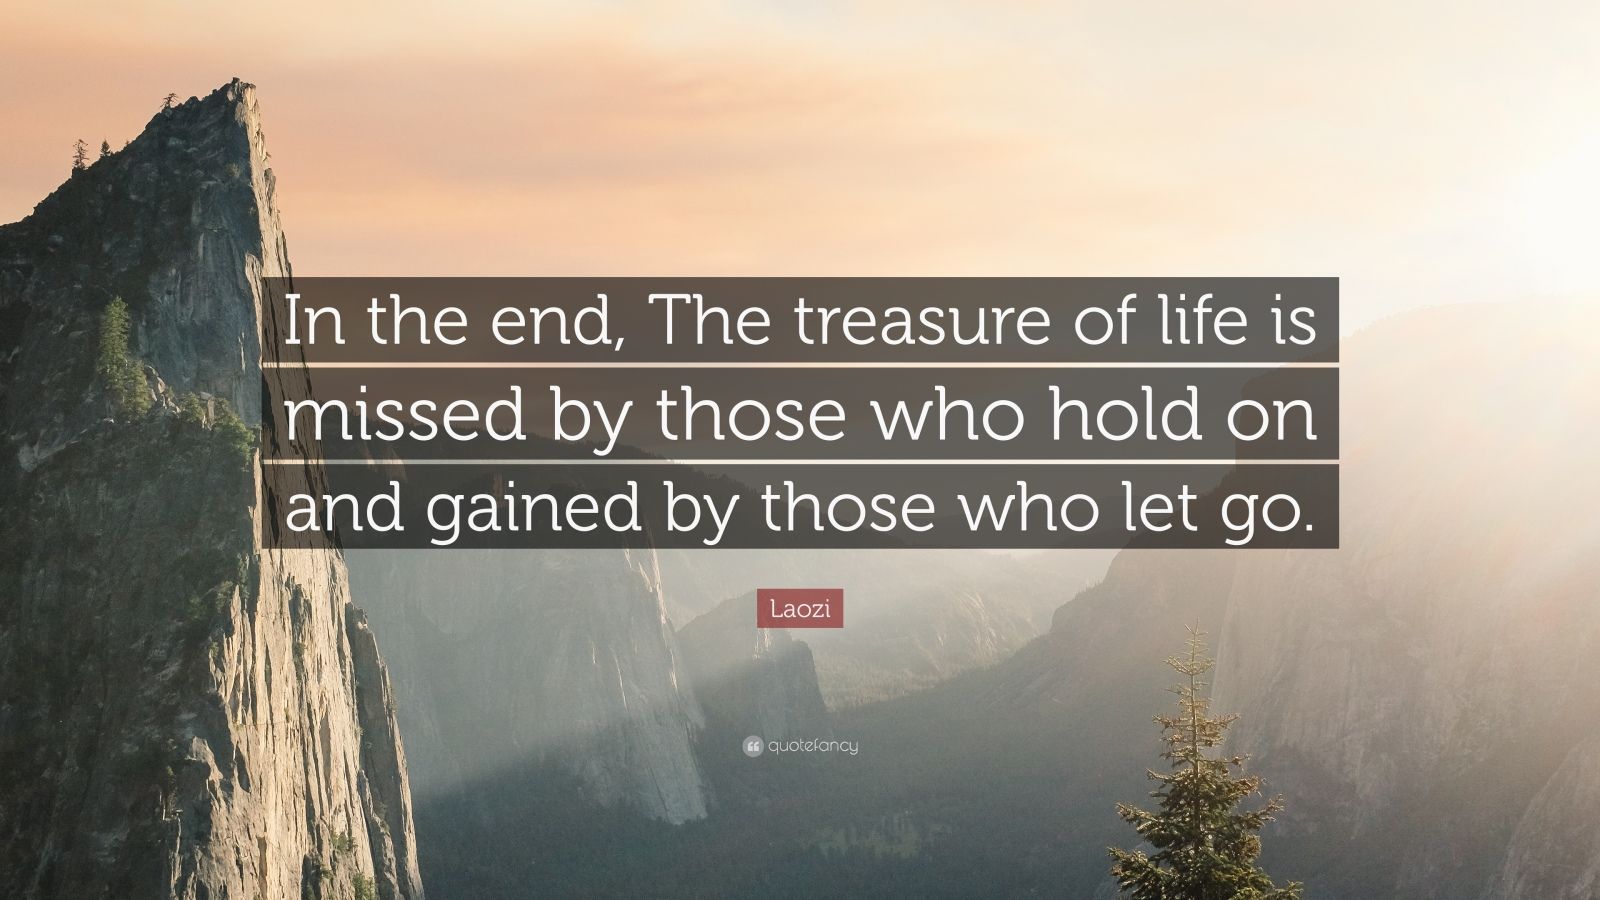 Laozi Quote: “In the end, The treasure of life is missed by those who ...